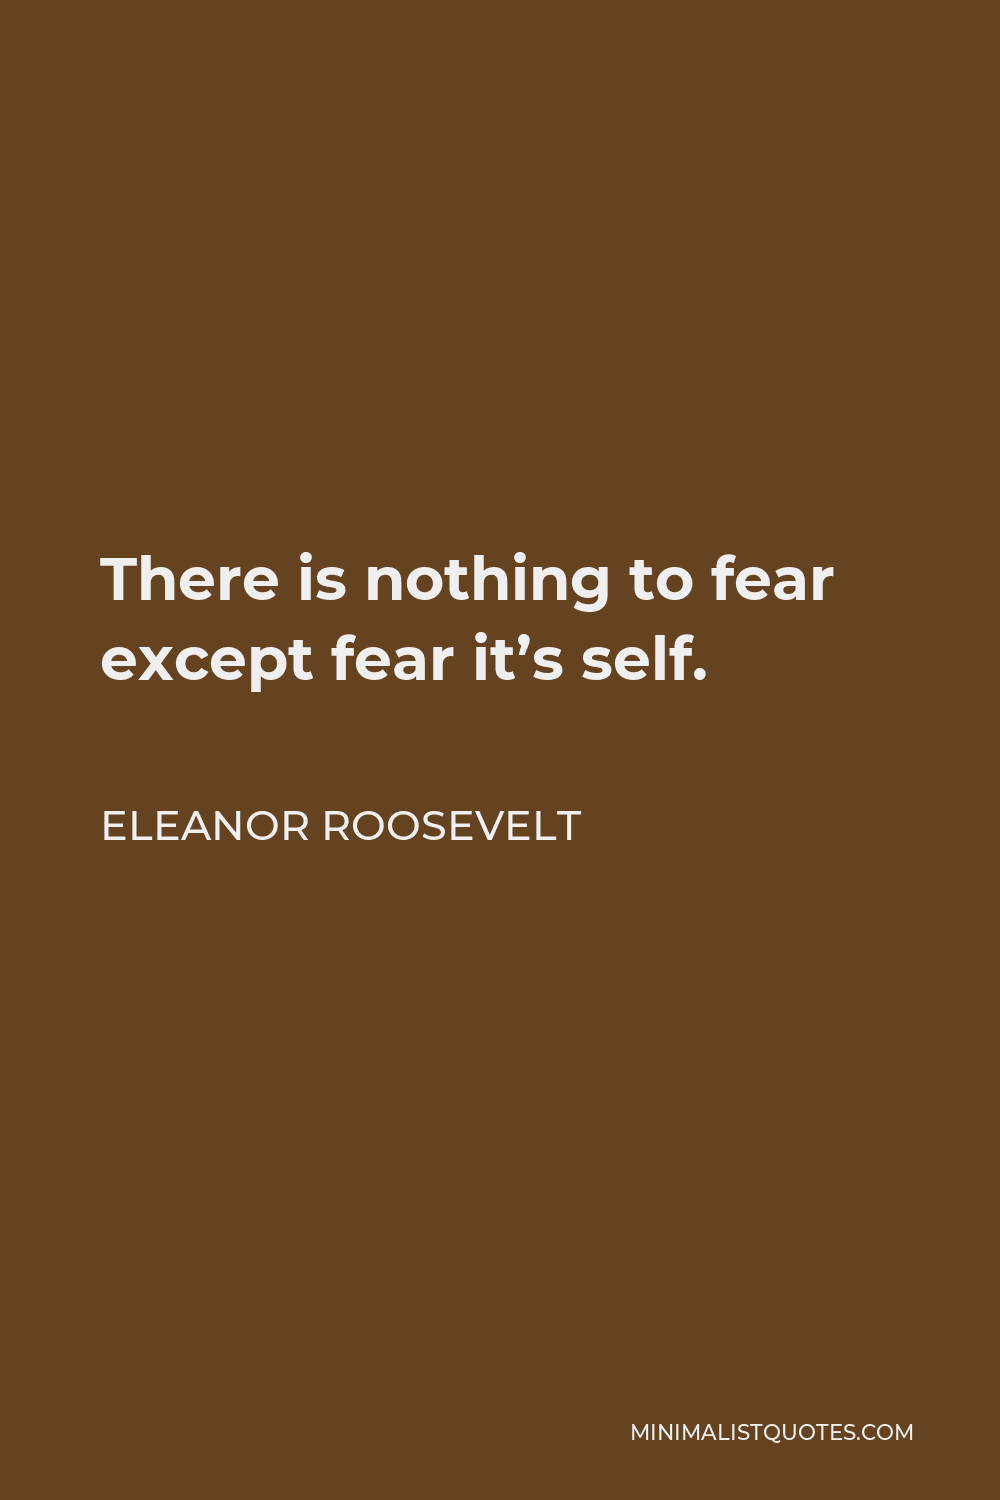 Eleanor Roosevelt Quote - There is nothing to fear except fear it’s self.